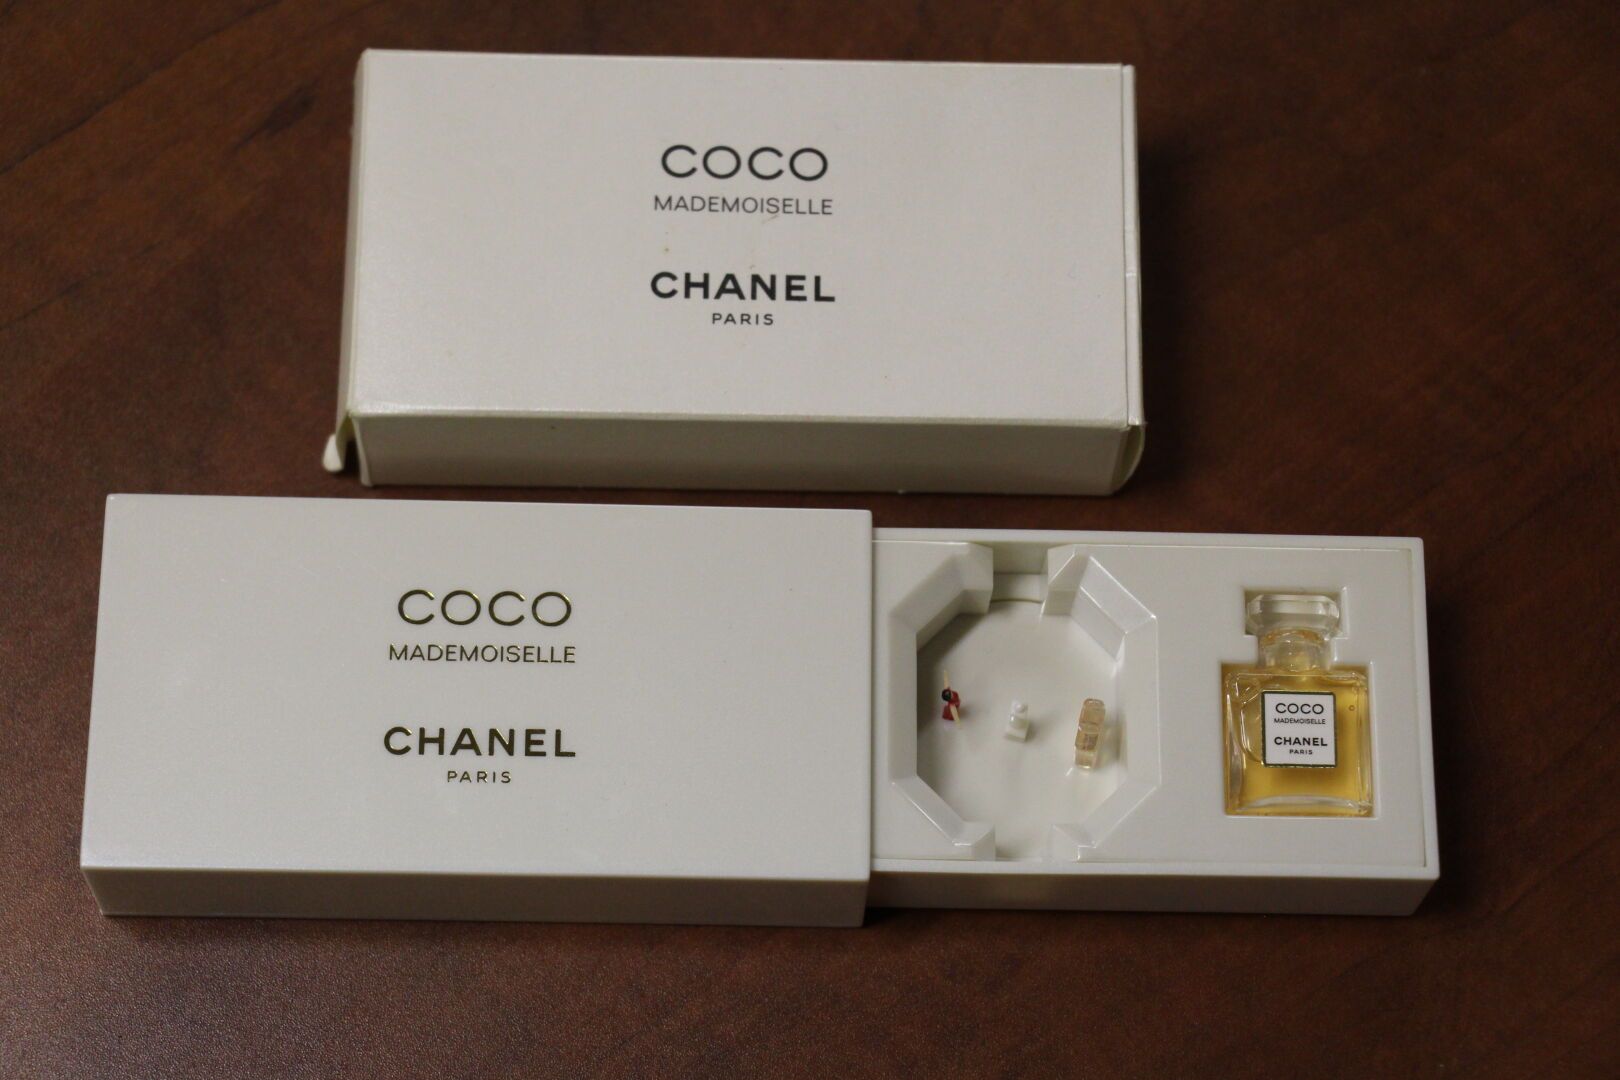 CHANEL - COCO Mademoiselle Miniature perfume jar presented in a music box  (functional) 2,5 x 11 x 5,5 cm